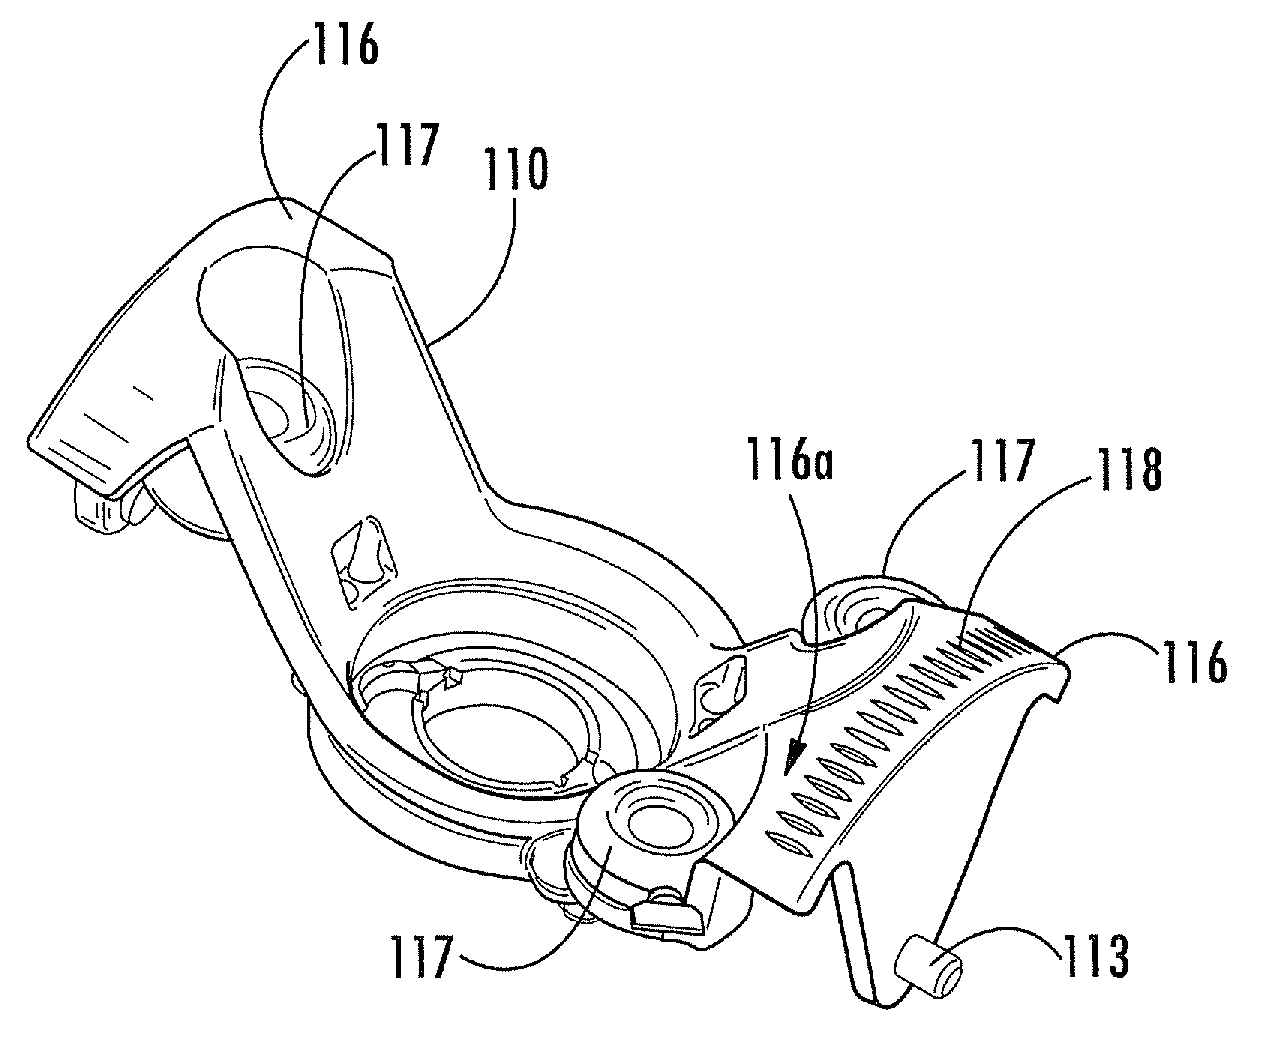 MRI-guided medical interventional systems and methods